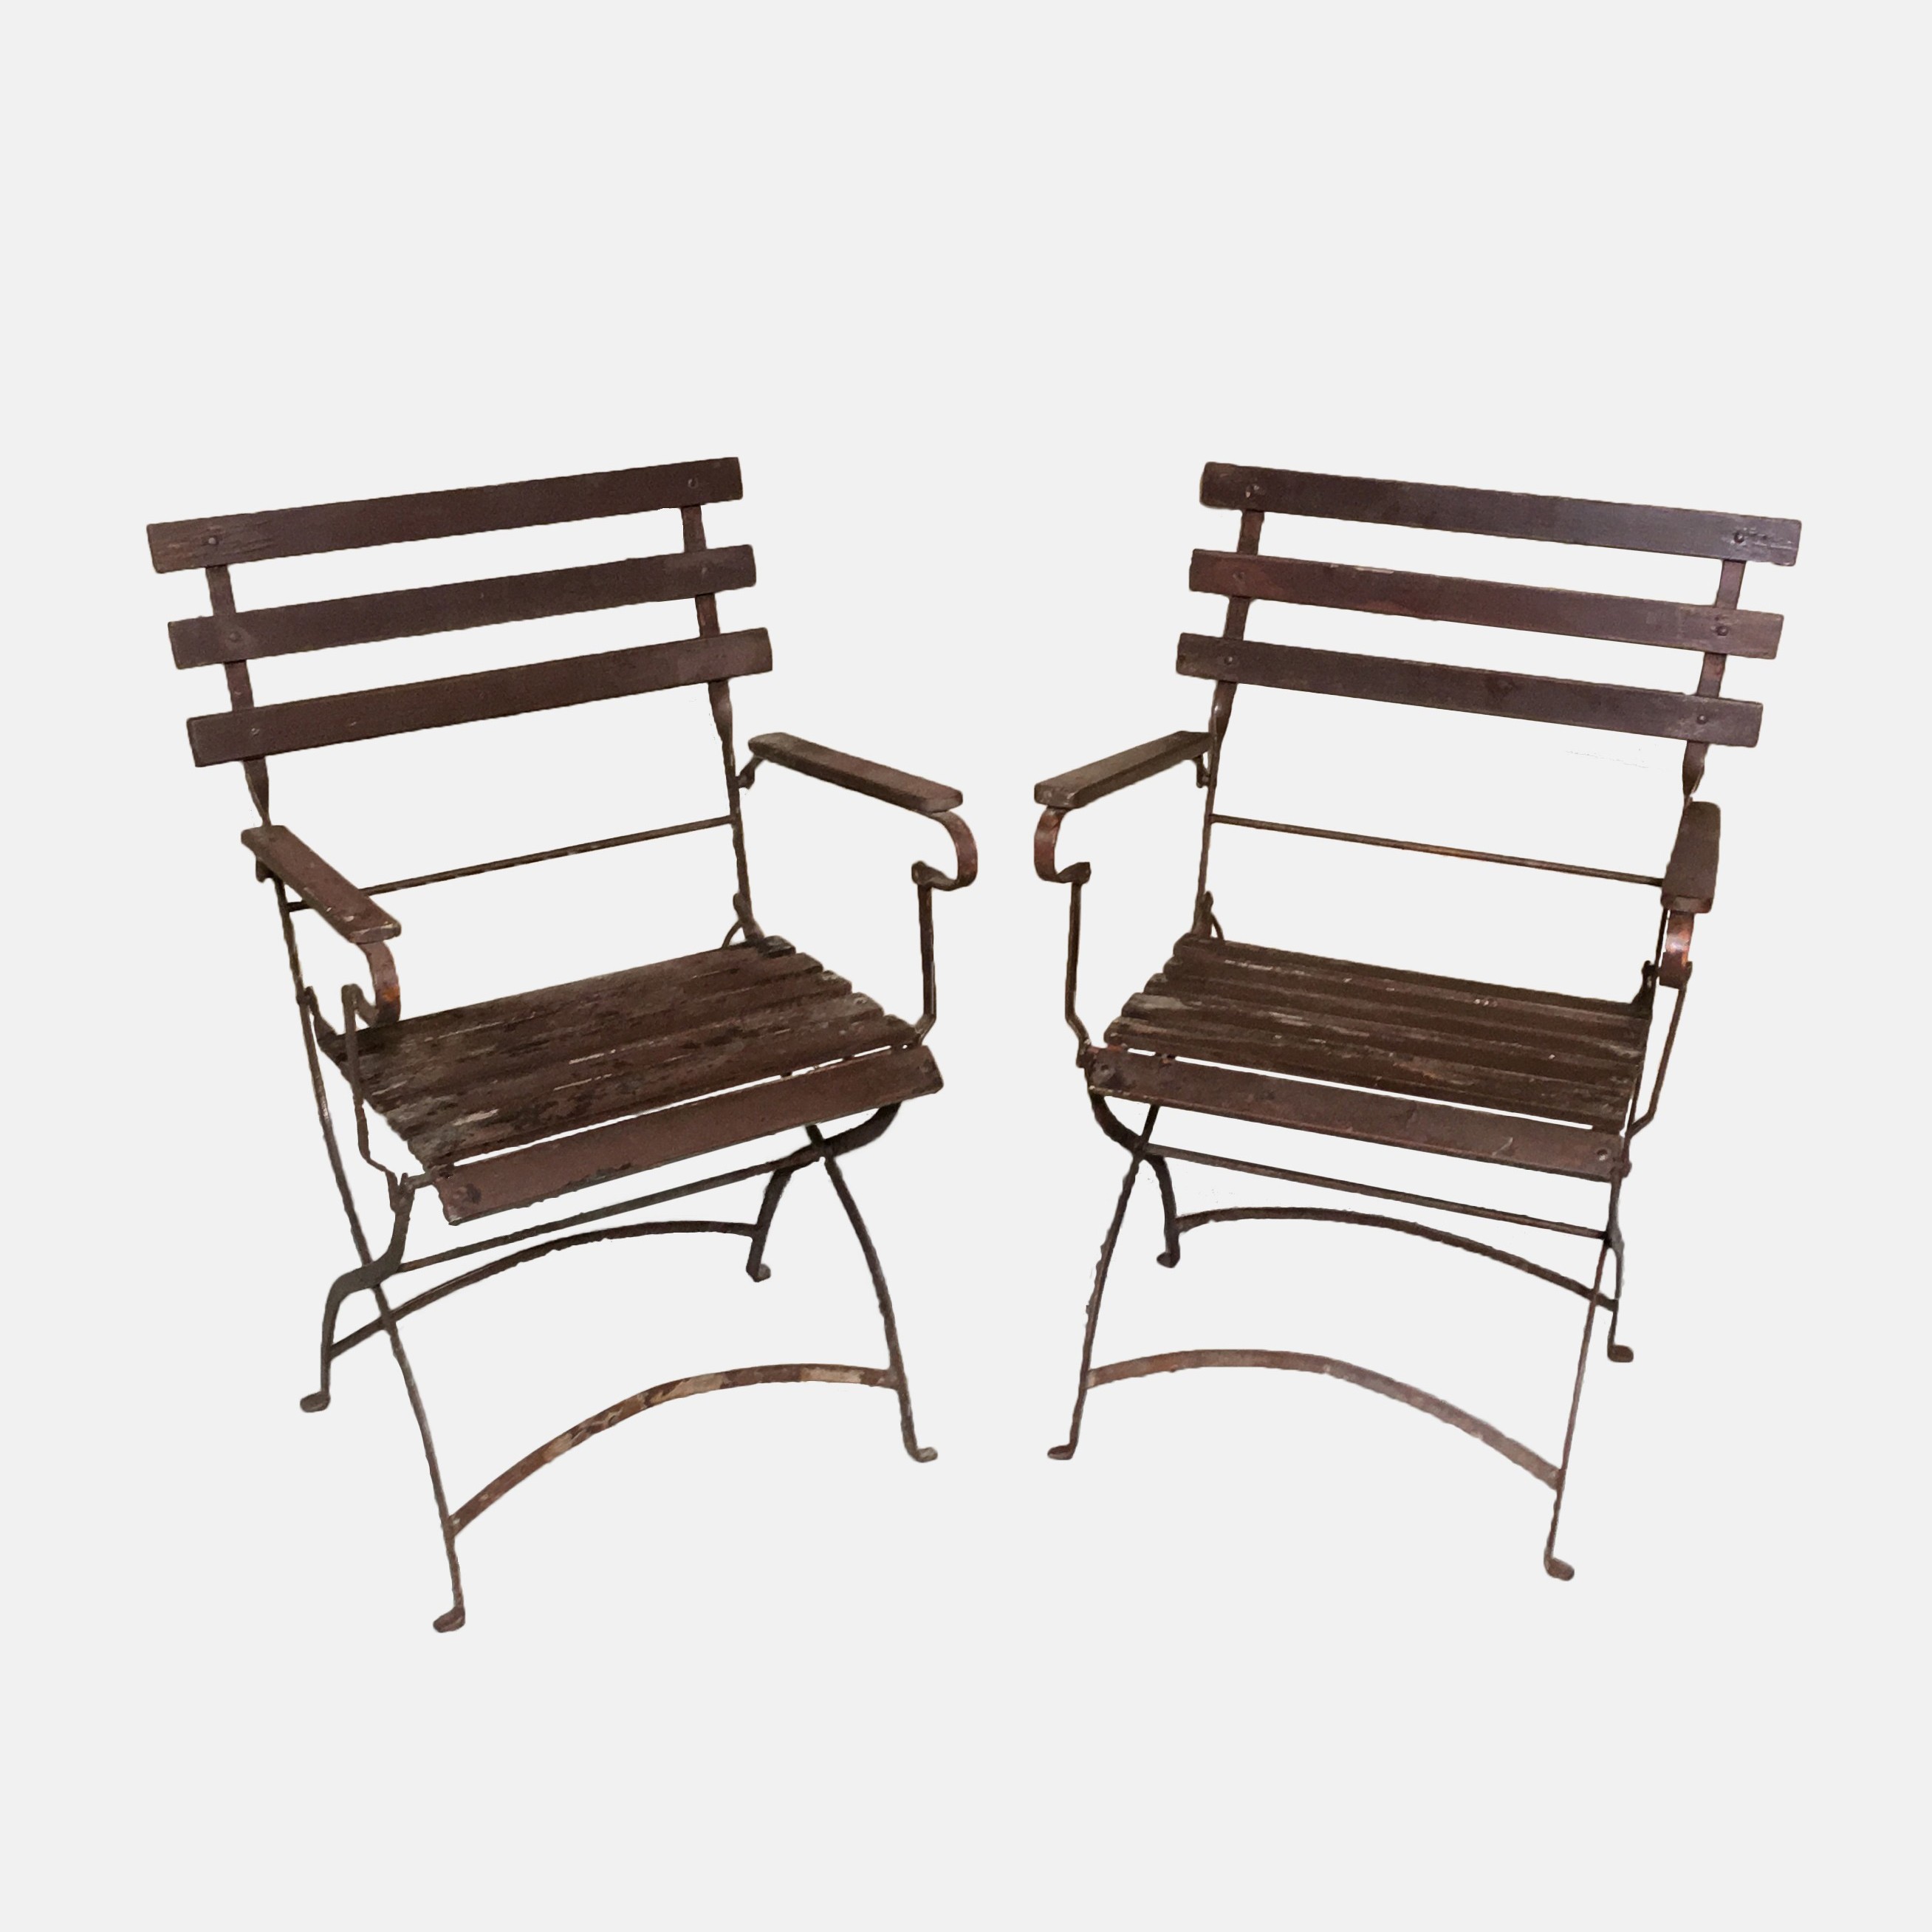 Weggooien Puno viering Pair french bistro chairs | www.ClaudiaCollections.com